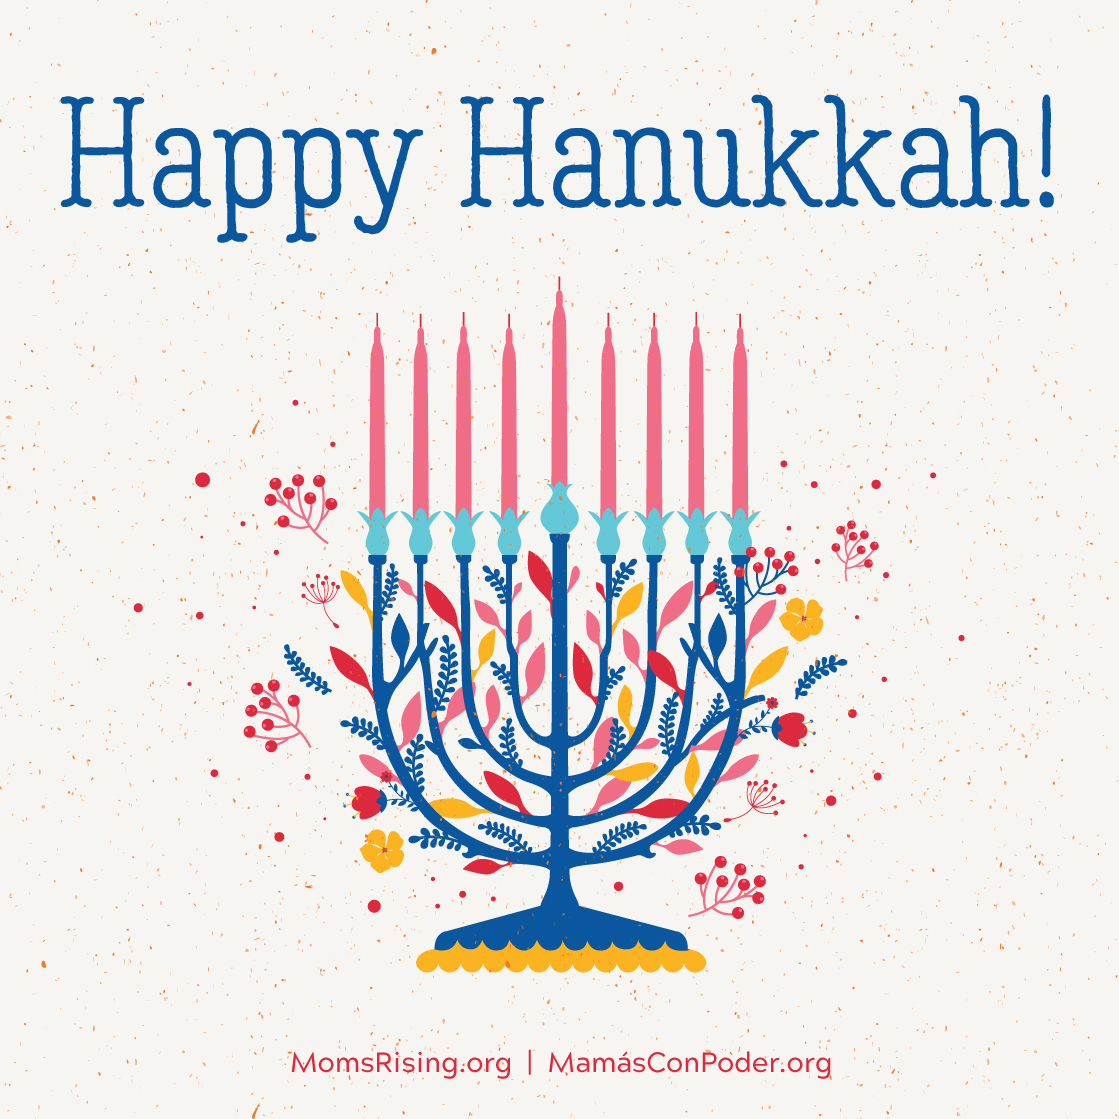 Collection Of The Best Happy Hanukkah Memes 2020 - Guide 4 Moms